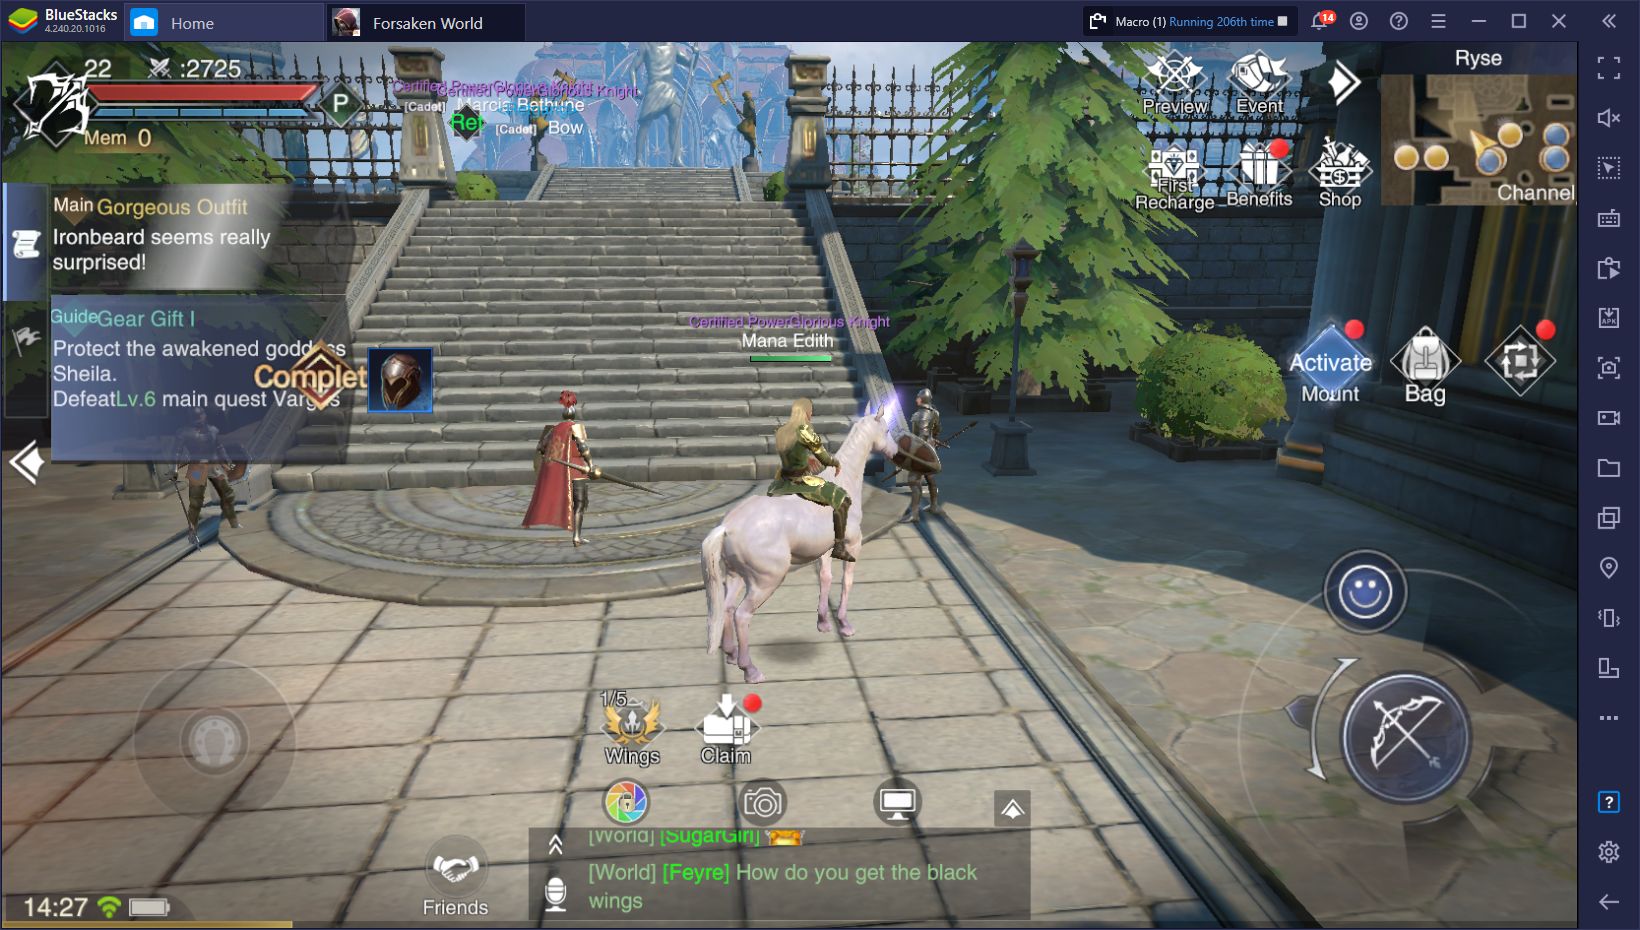 Forsaken World: Gods and Demons on PC – How to Use Our BlueStacks Tools to Improve Your Experience